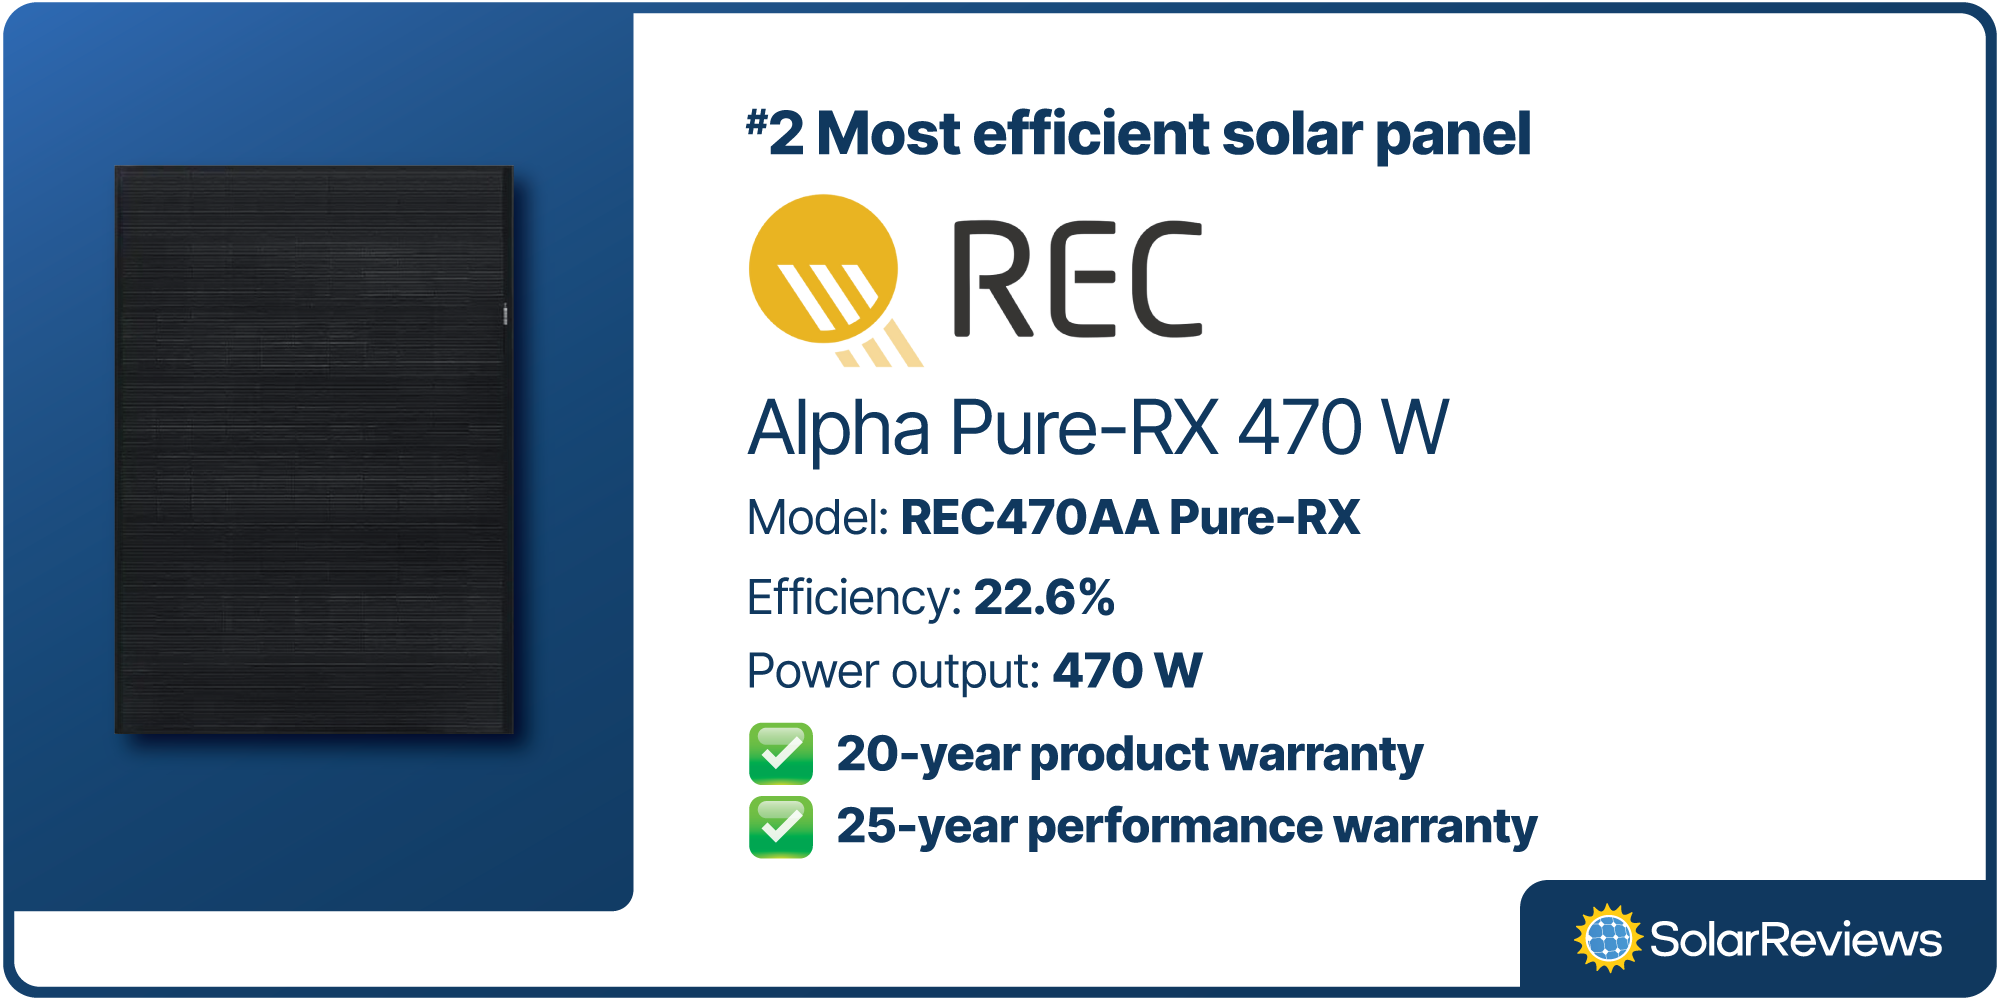 REC Group's Alpha Pure-RX 470 W panel is the second most efficient home solar panel at 22.6% efficient and comes with a 20-year product and 25-year performance warranty.